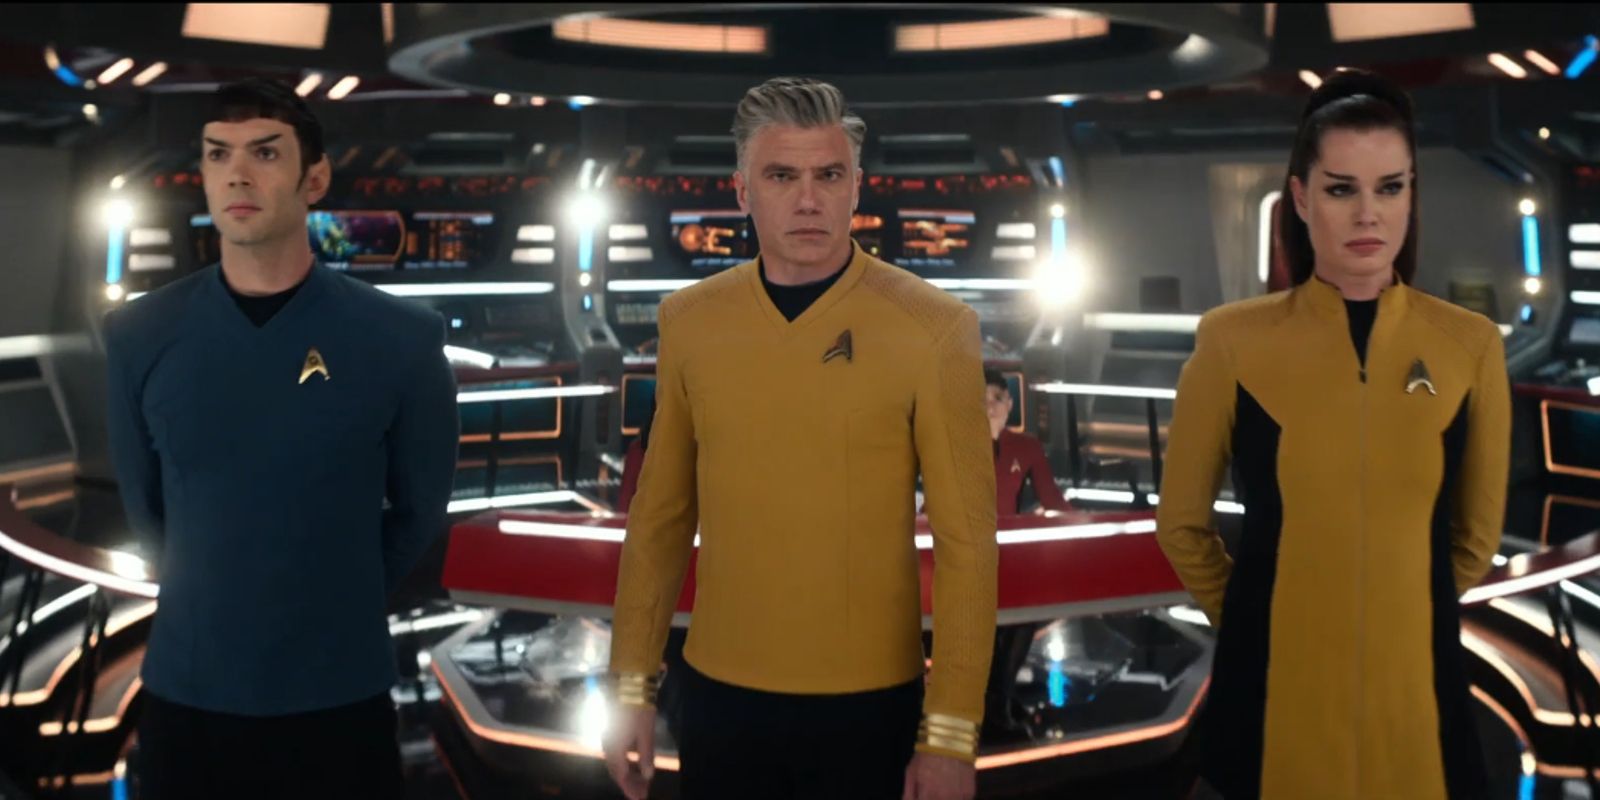 Anson Mount, Ethan Peck, and Rebecca Romijn standing aboard the bridge of the Starship Enterprise star trek strange new worlds season 2 trailer in costume as Captain Christopher Pike, Spock, and Una Chin-Riley respectively